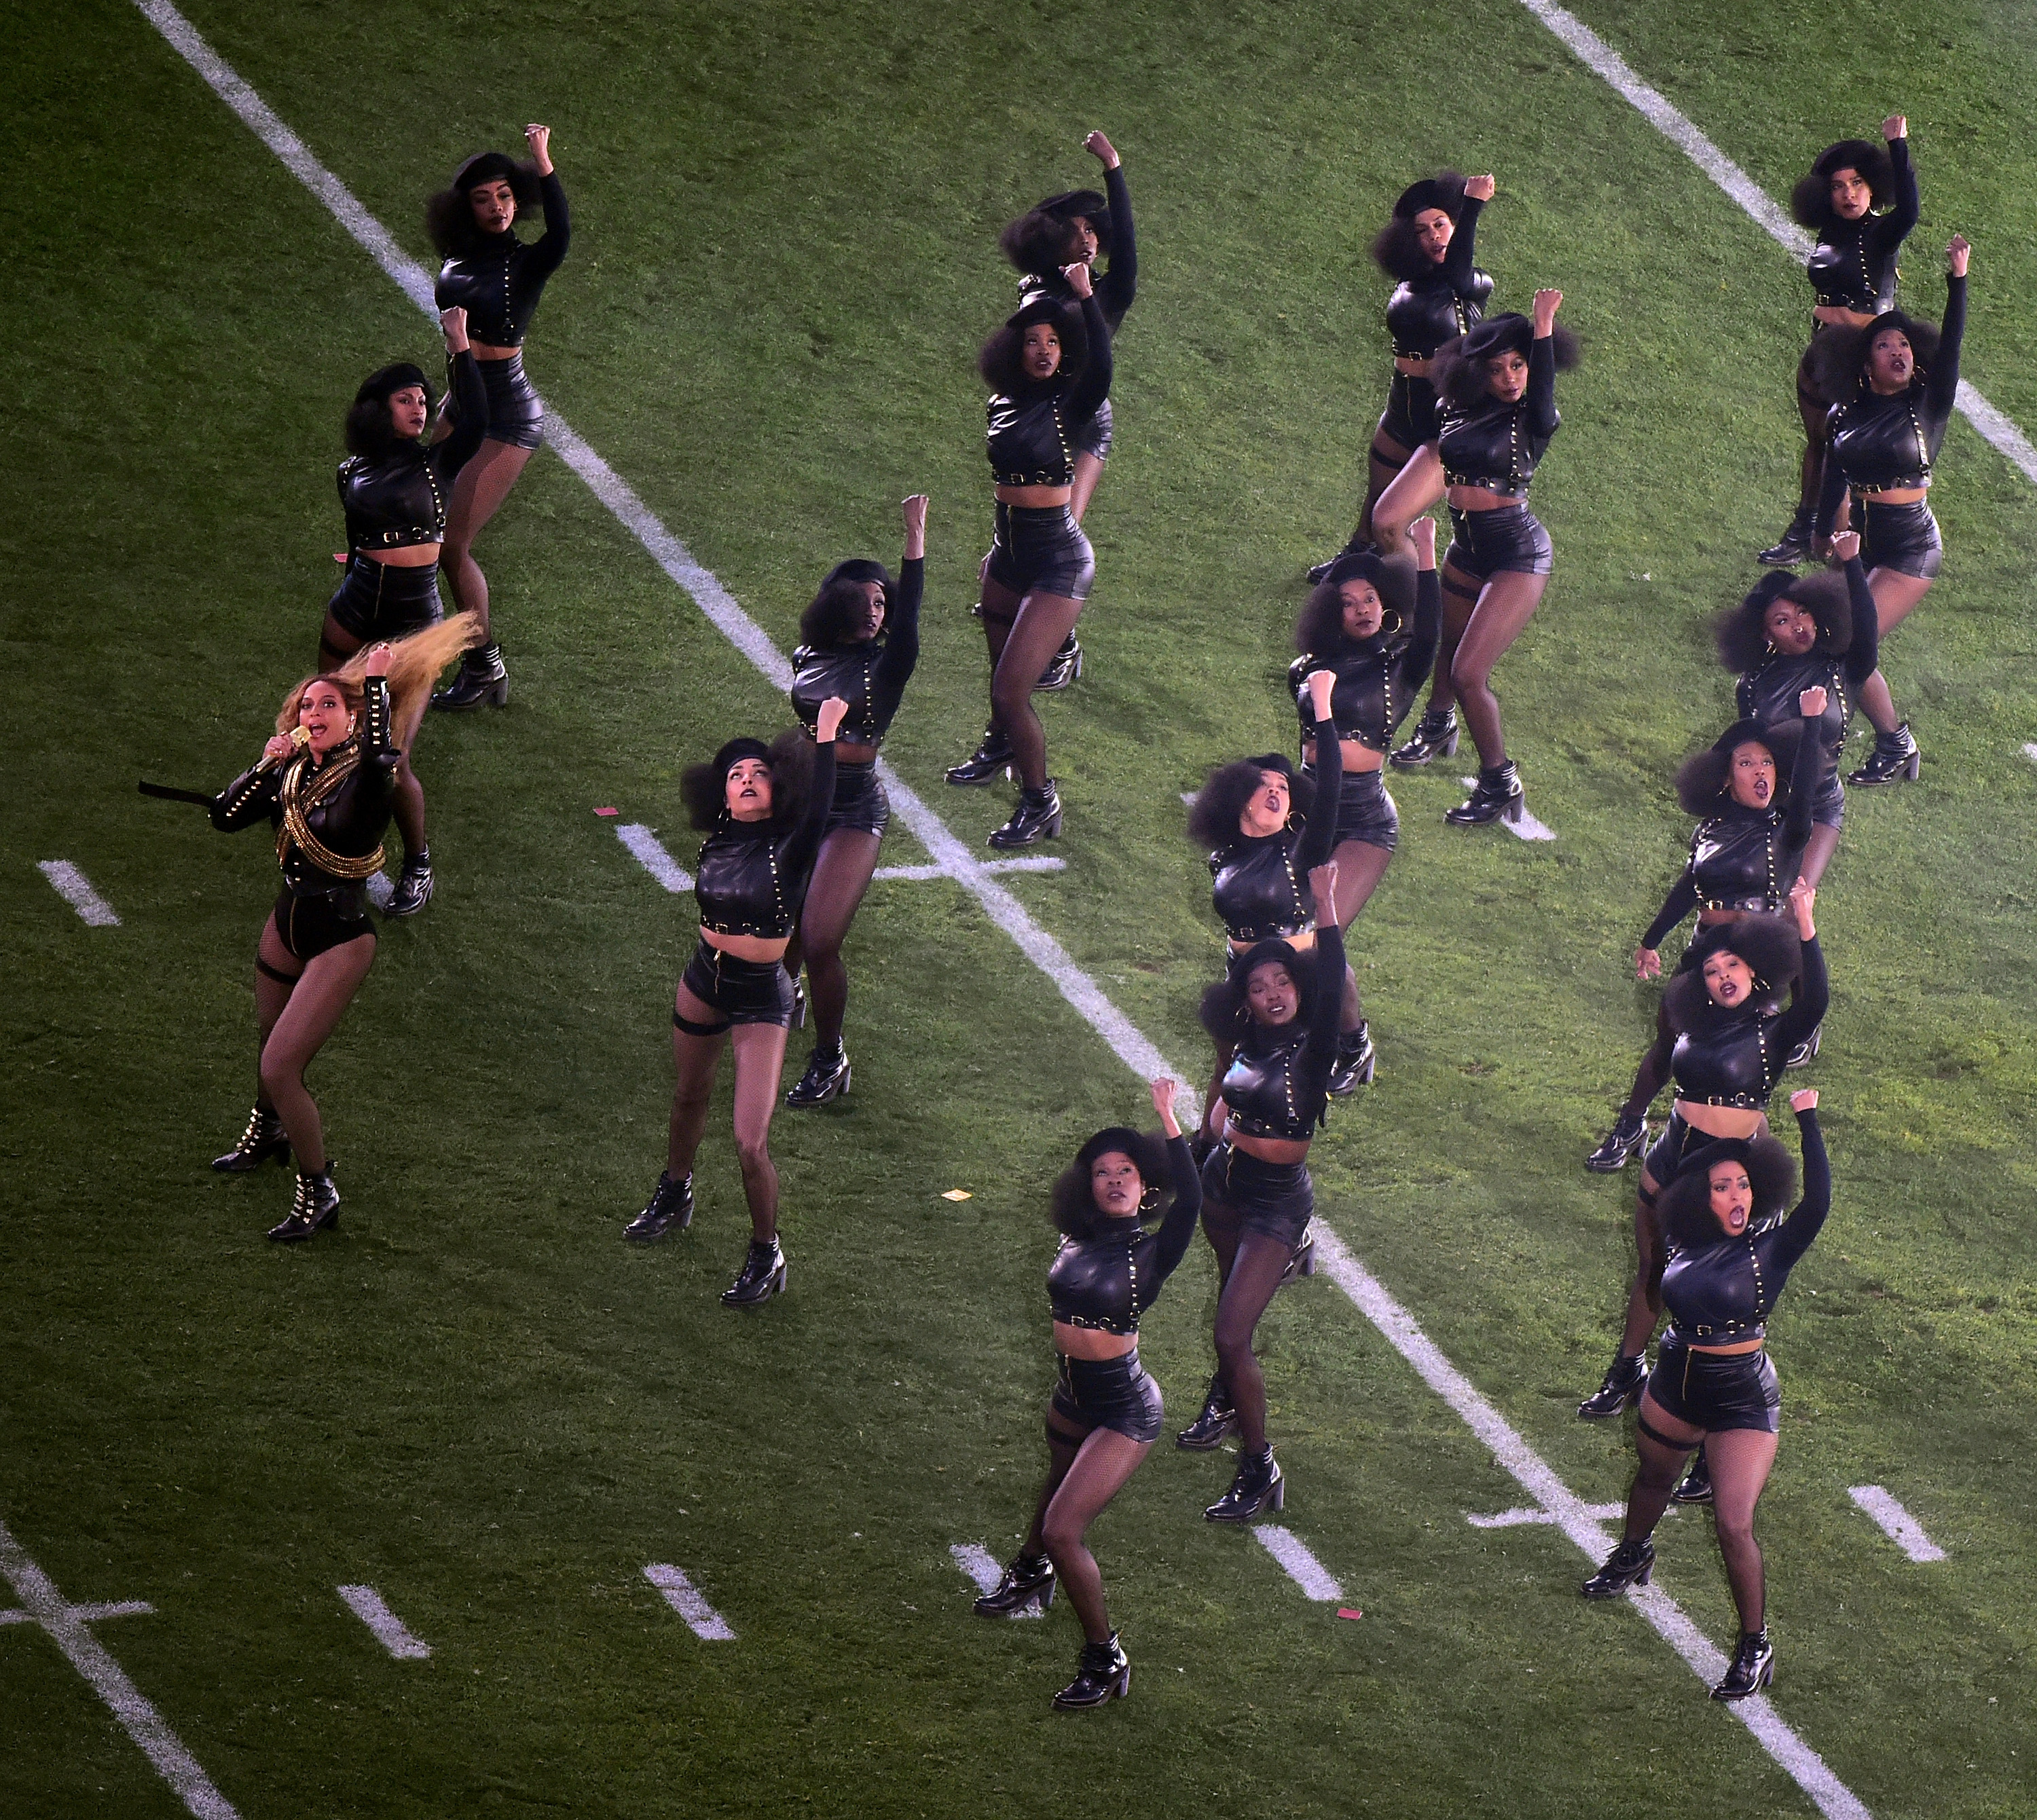 Beyonce and her dancers perform during the Super Bowl 50 halftime show at Levi's Stadium on Feb. 7, 2016, in Santa Clara, California. (Harry How—Getty Images)